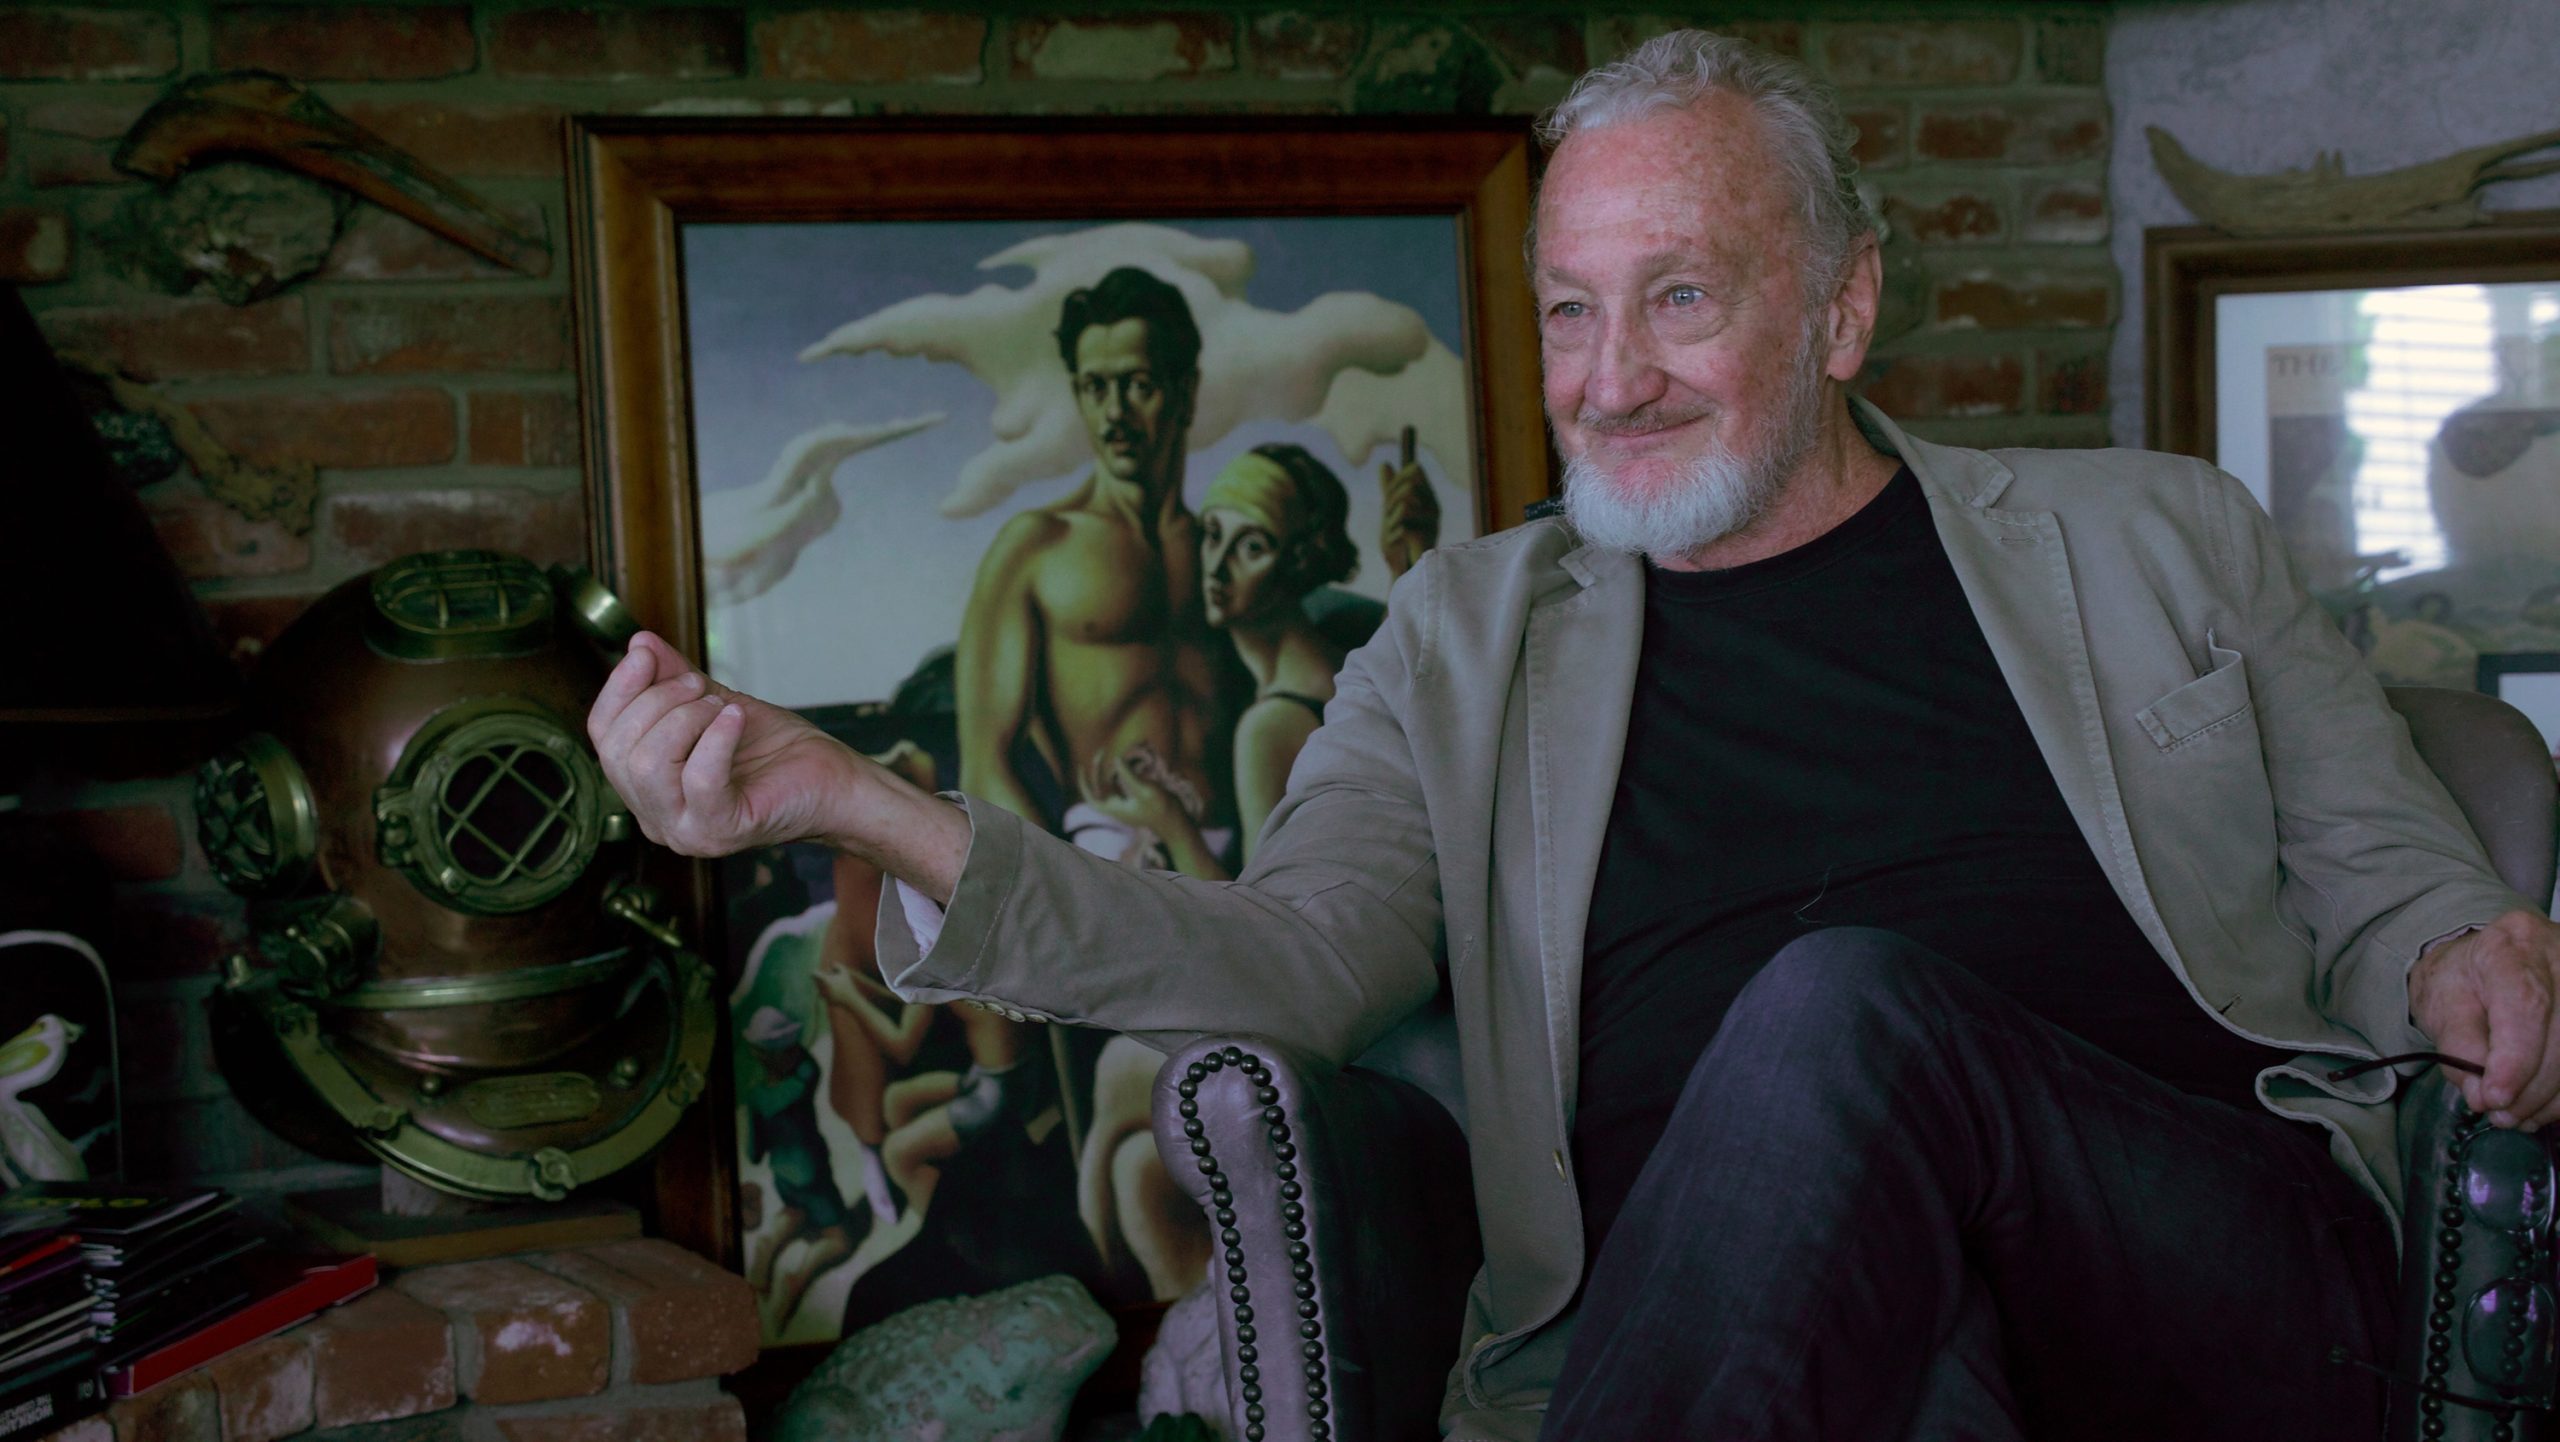 HOLLYWOOD DREAMS AND NIGHTMARES: THE ROBERT ENGLUND STORY - STARBURST Magazine